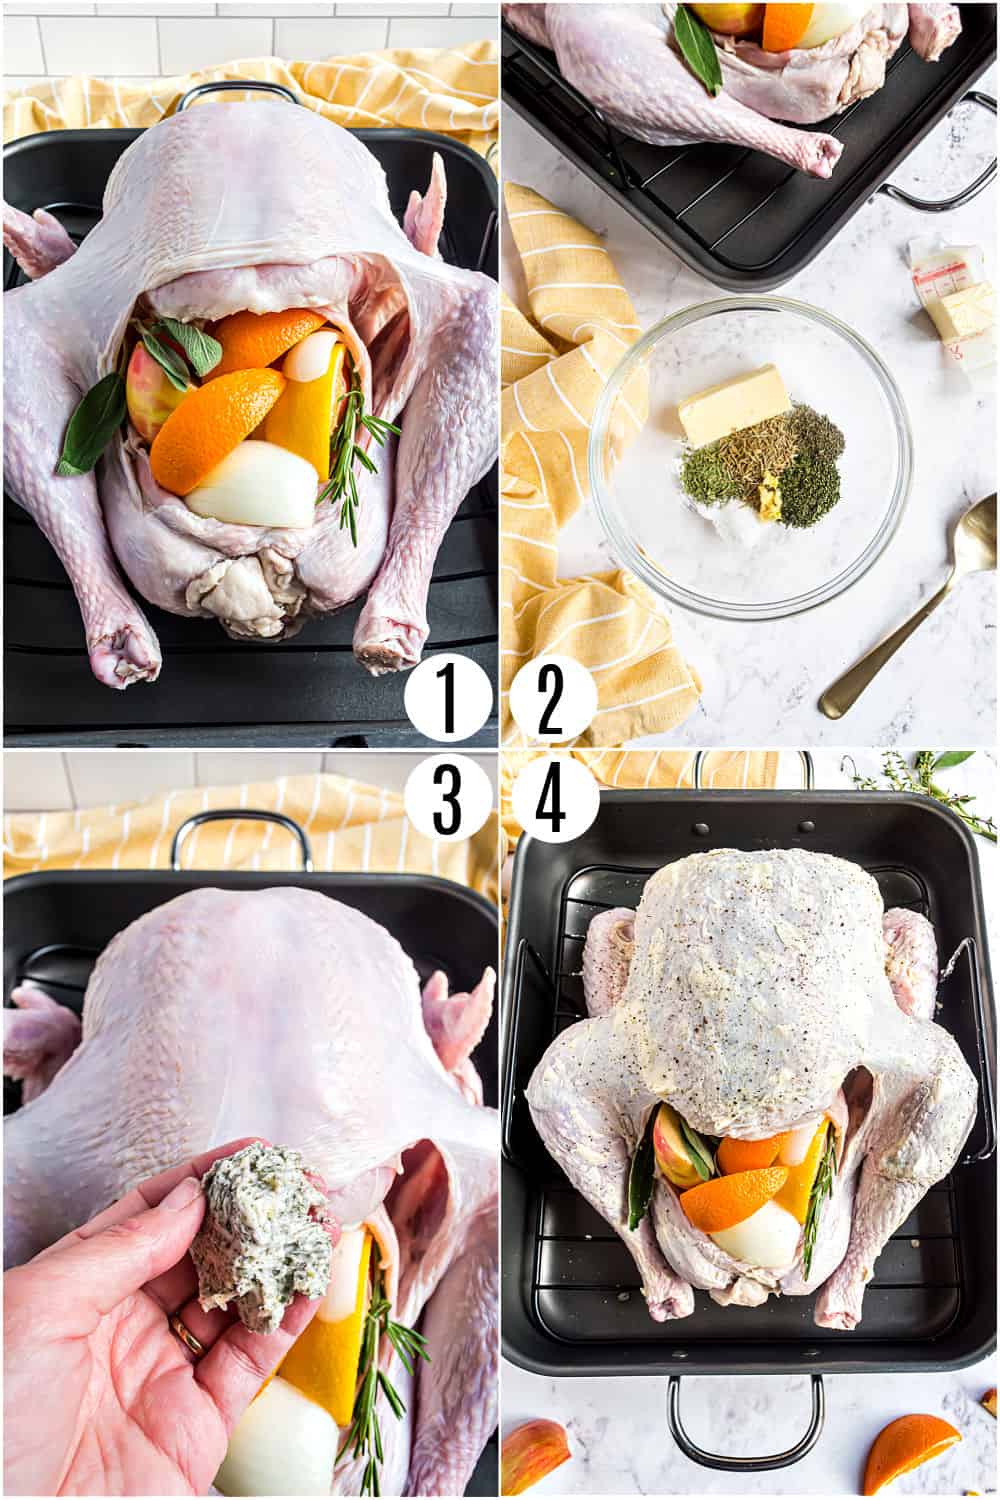 Step by step photos showing how to prepare a whole turkey.